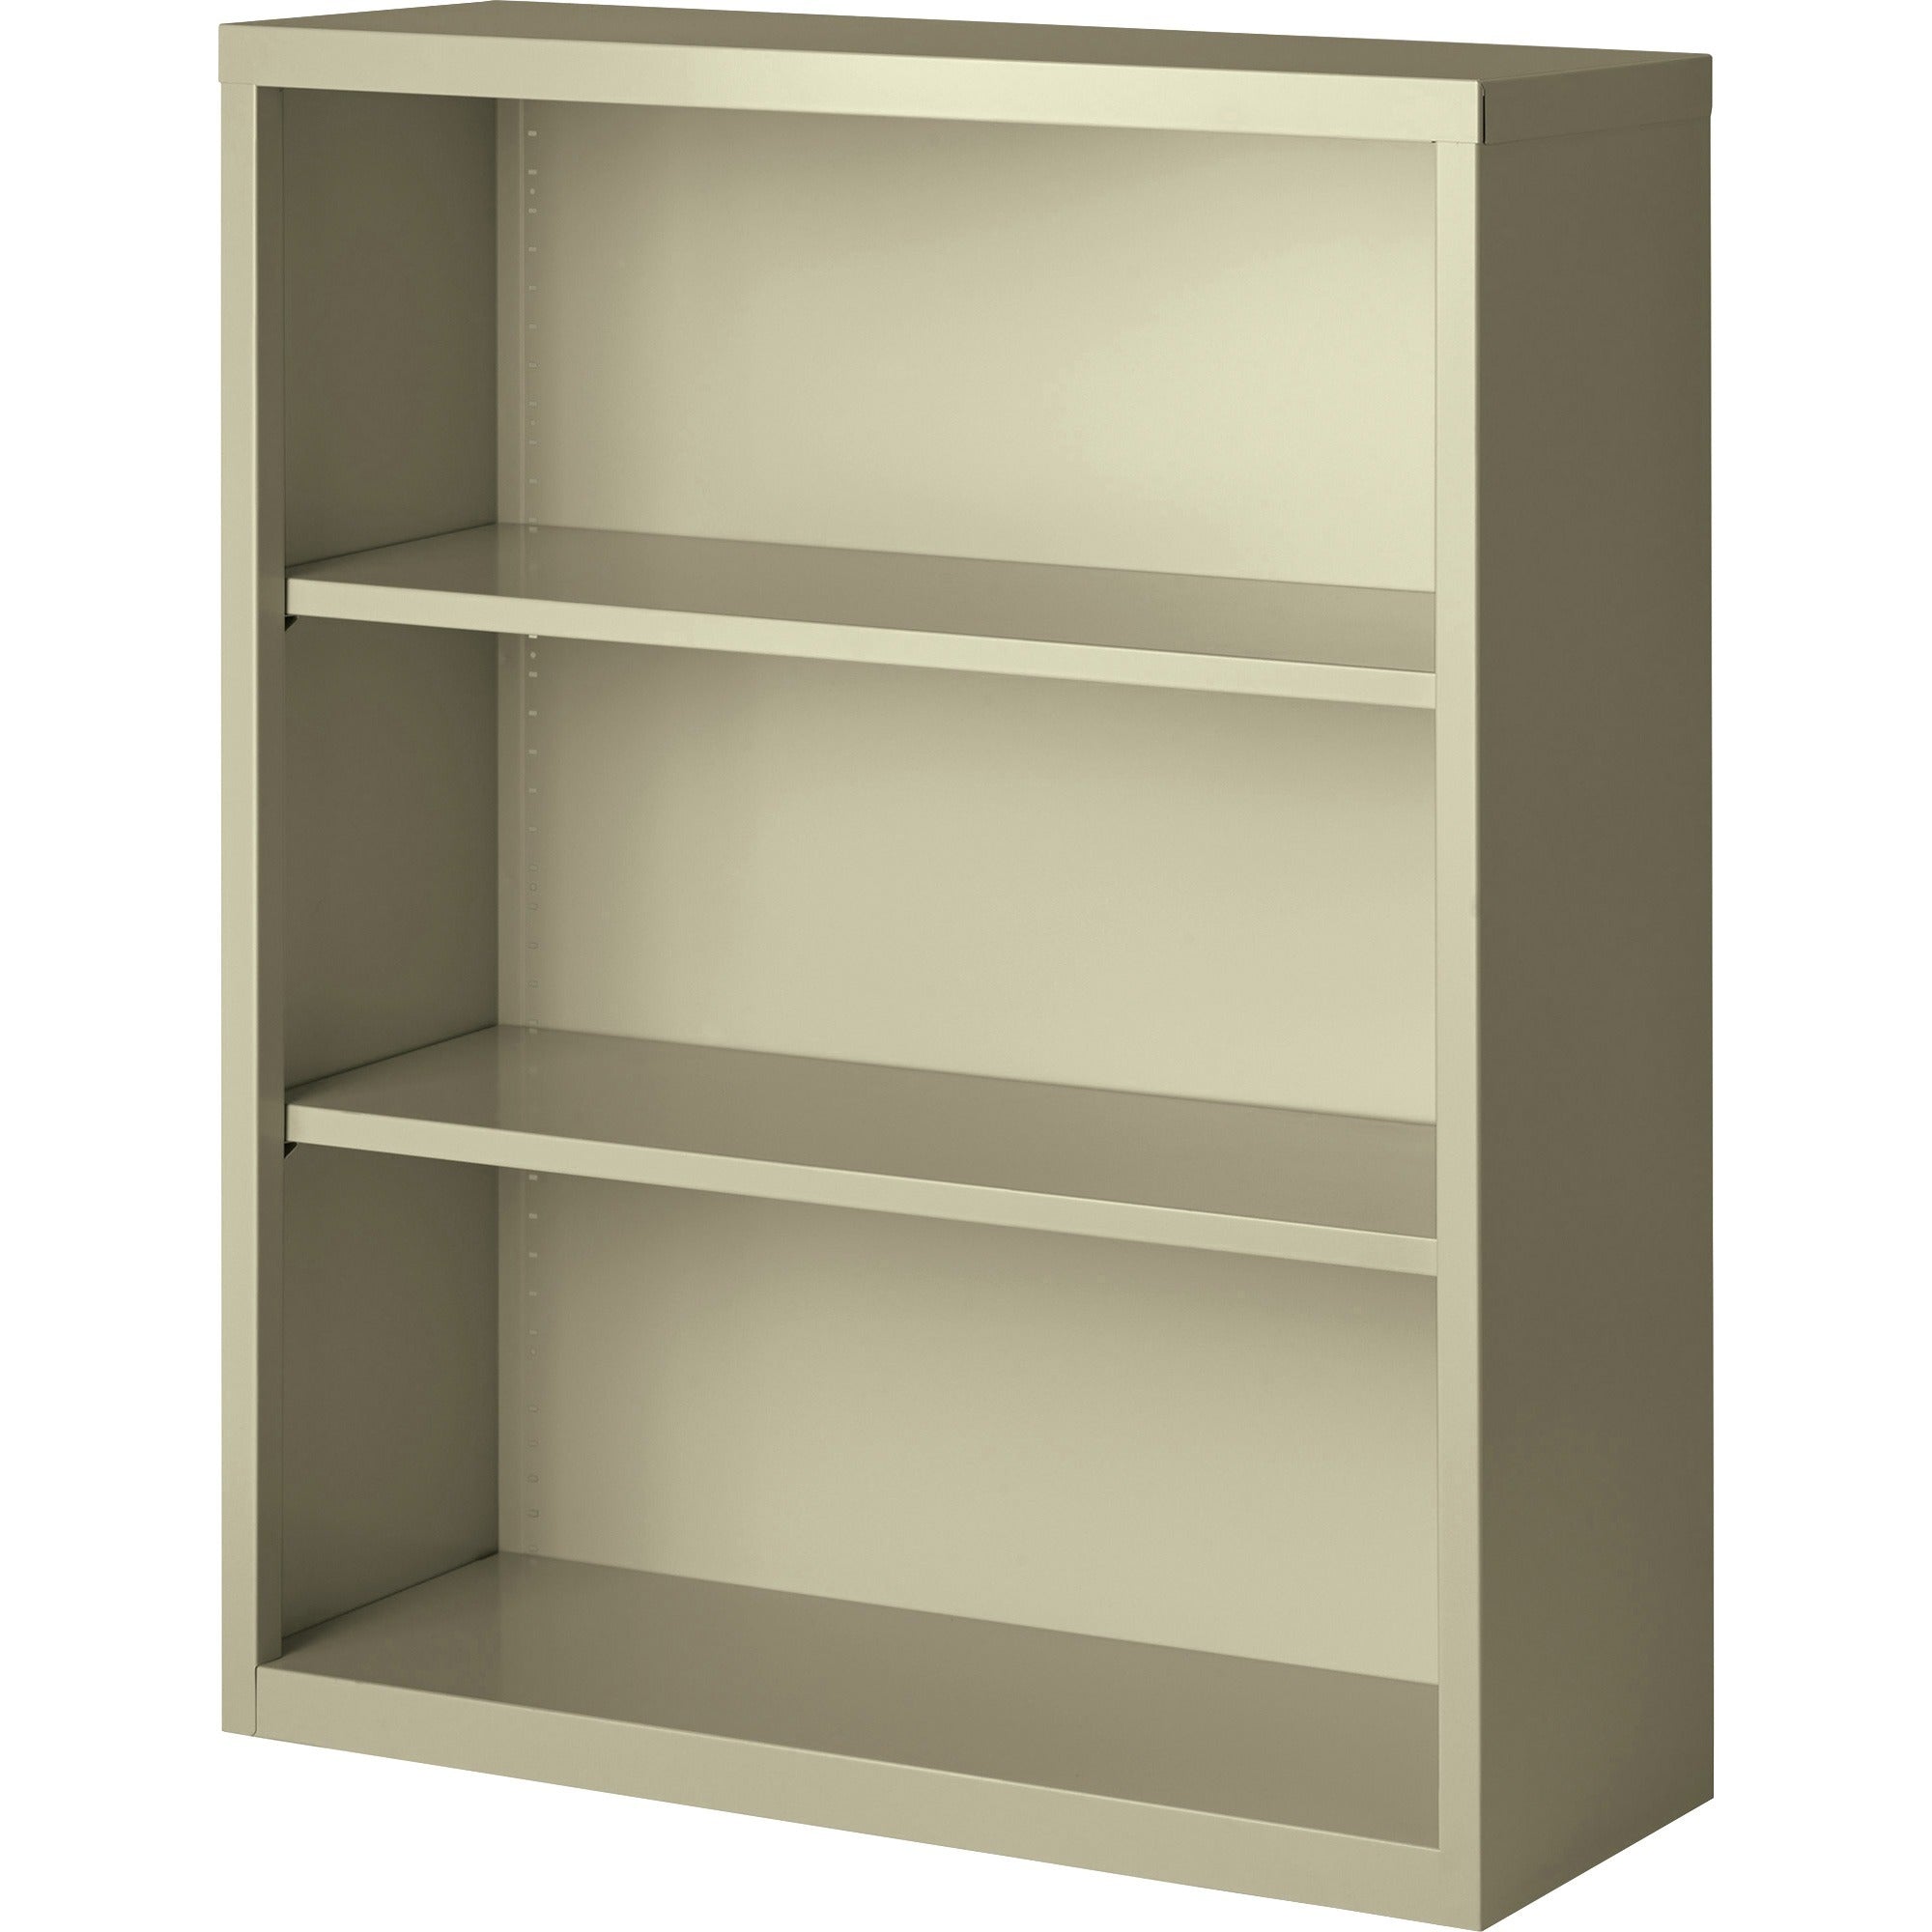 Lorell Fortress Series Bookcase - 34.5" x 13" x 42" - 3 x Shelf(ves) - Putty - Powder Coated - Steel - Recycled - 